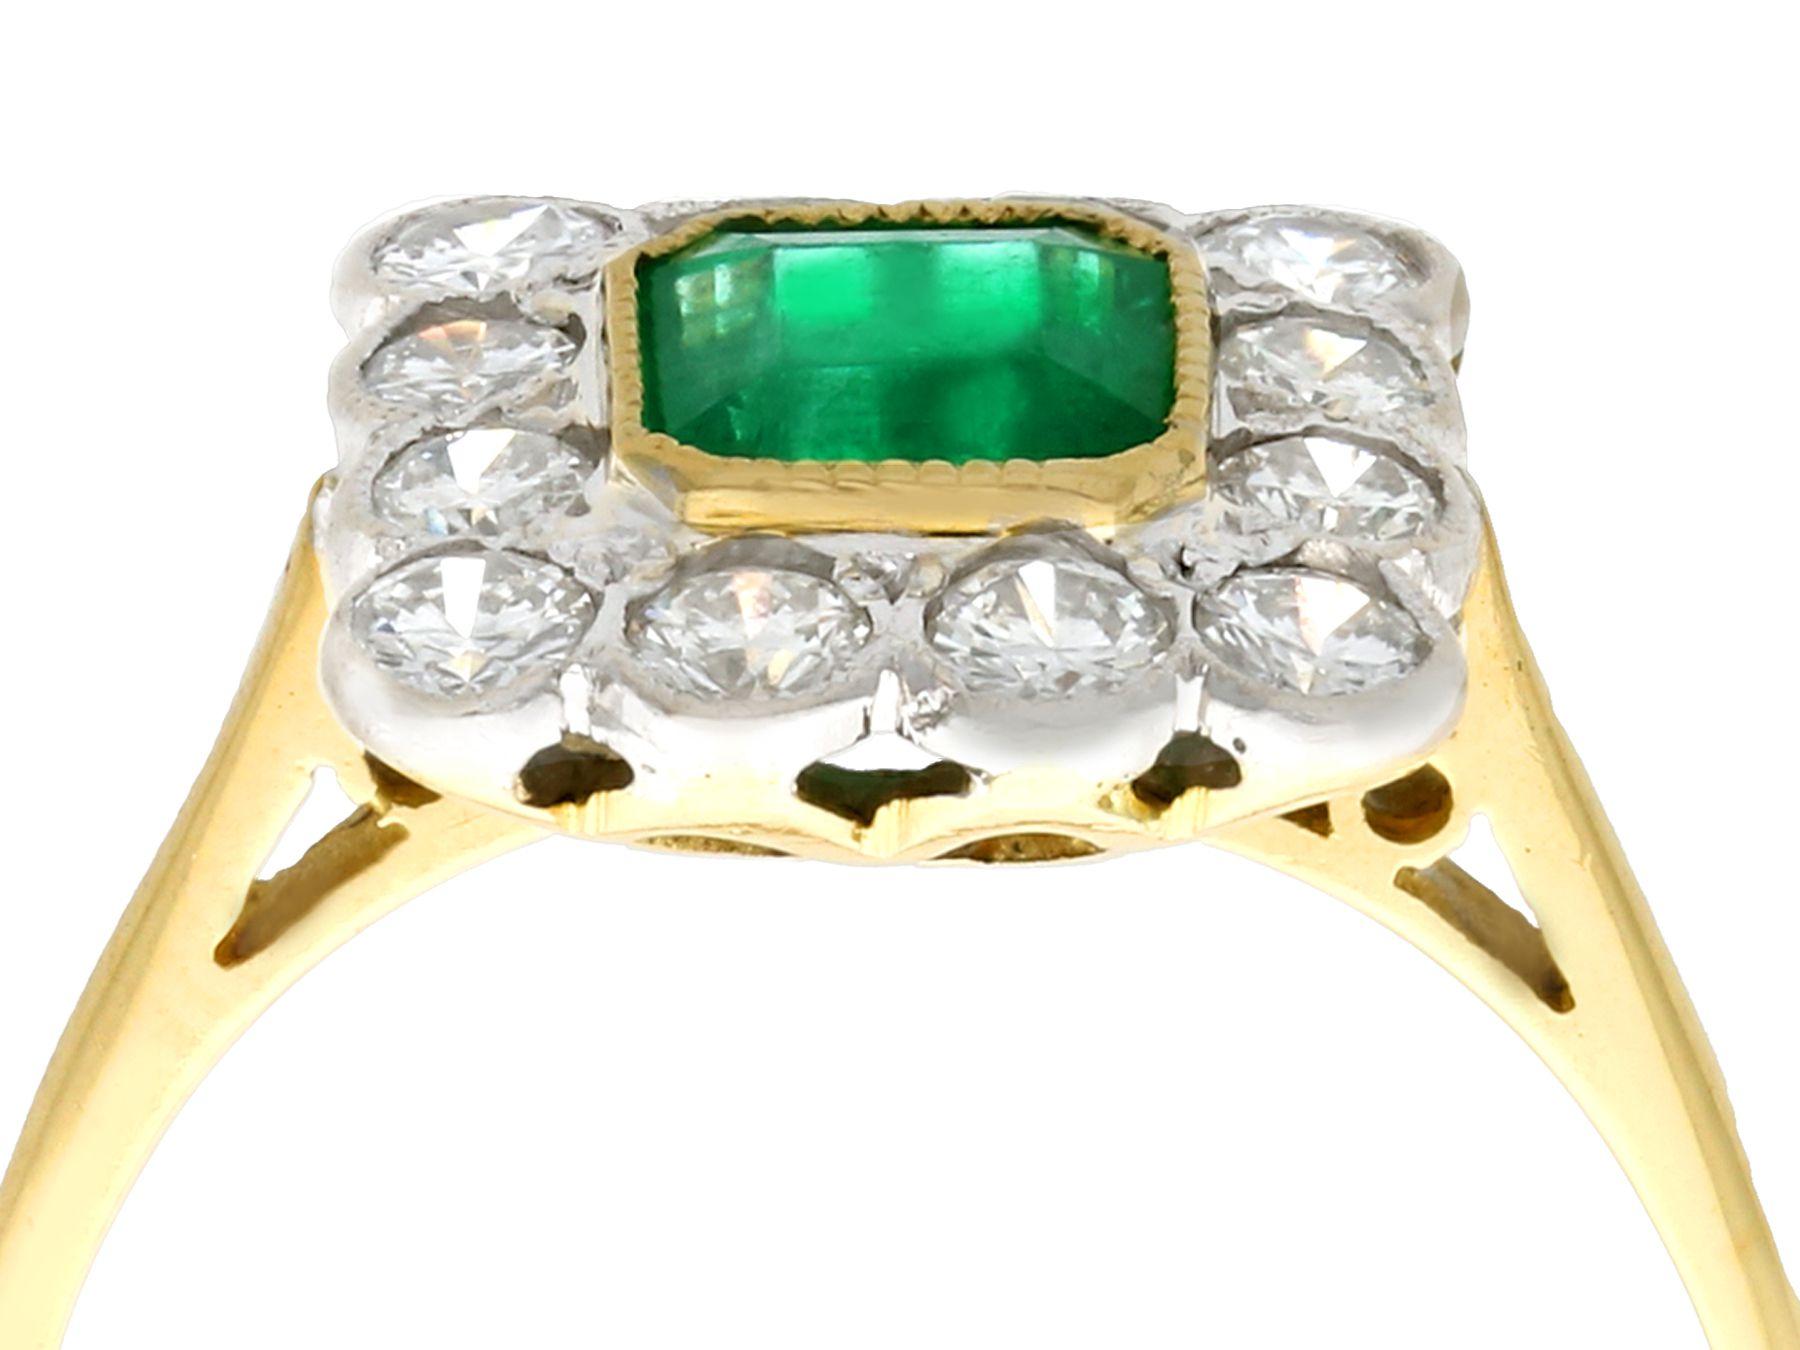 A fine and impressive vintage 0.88 carat natural emerald and 0.60 carat diamond, 18k yellow gold, 18k white gold set dress ring; part of our vintage jewelry and estate jewelry collections

This impressive vintage emerald and diamond ring has been